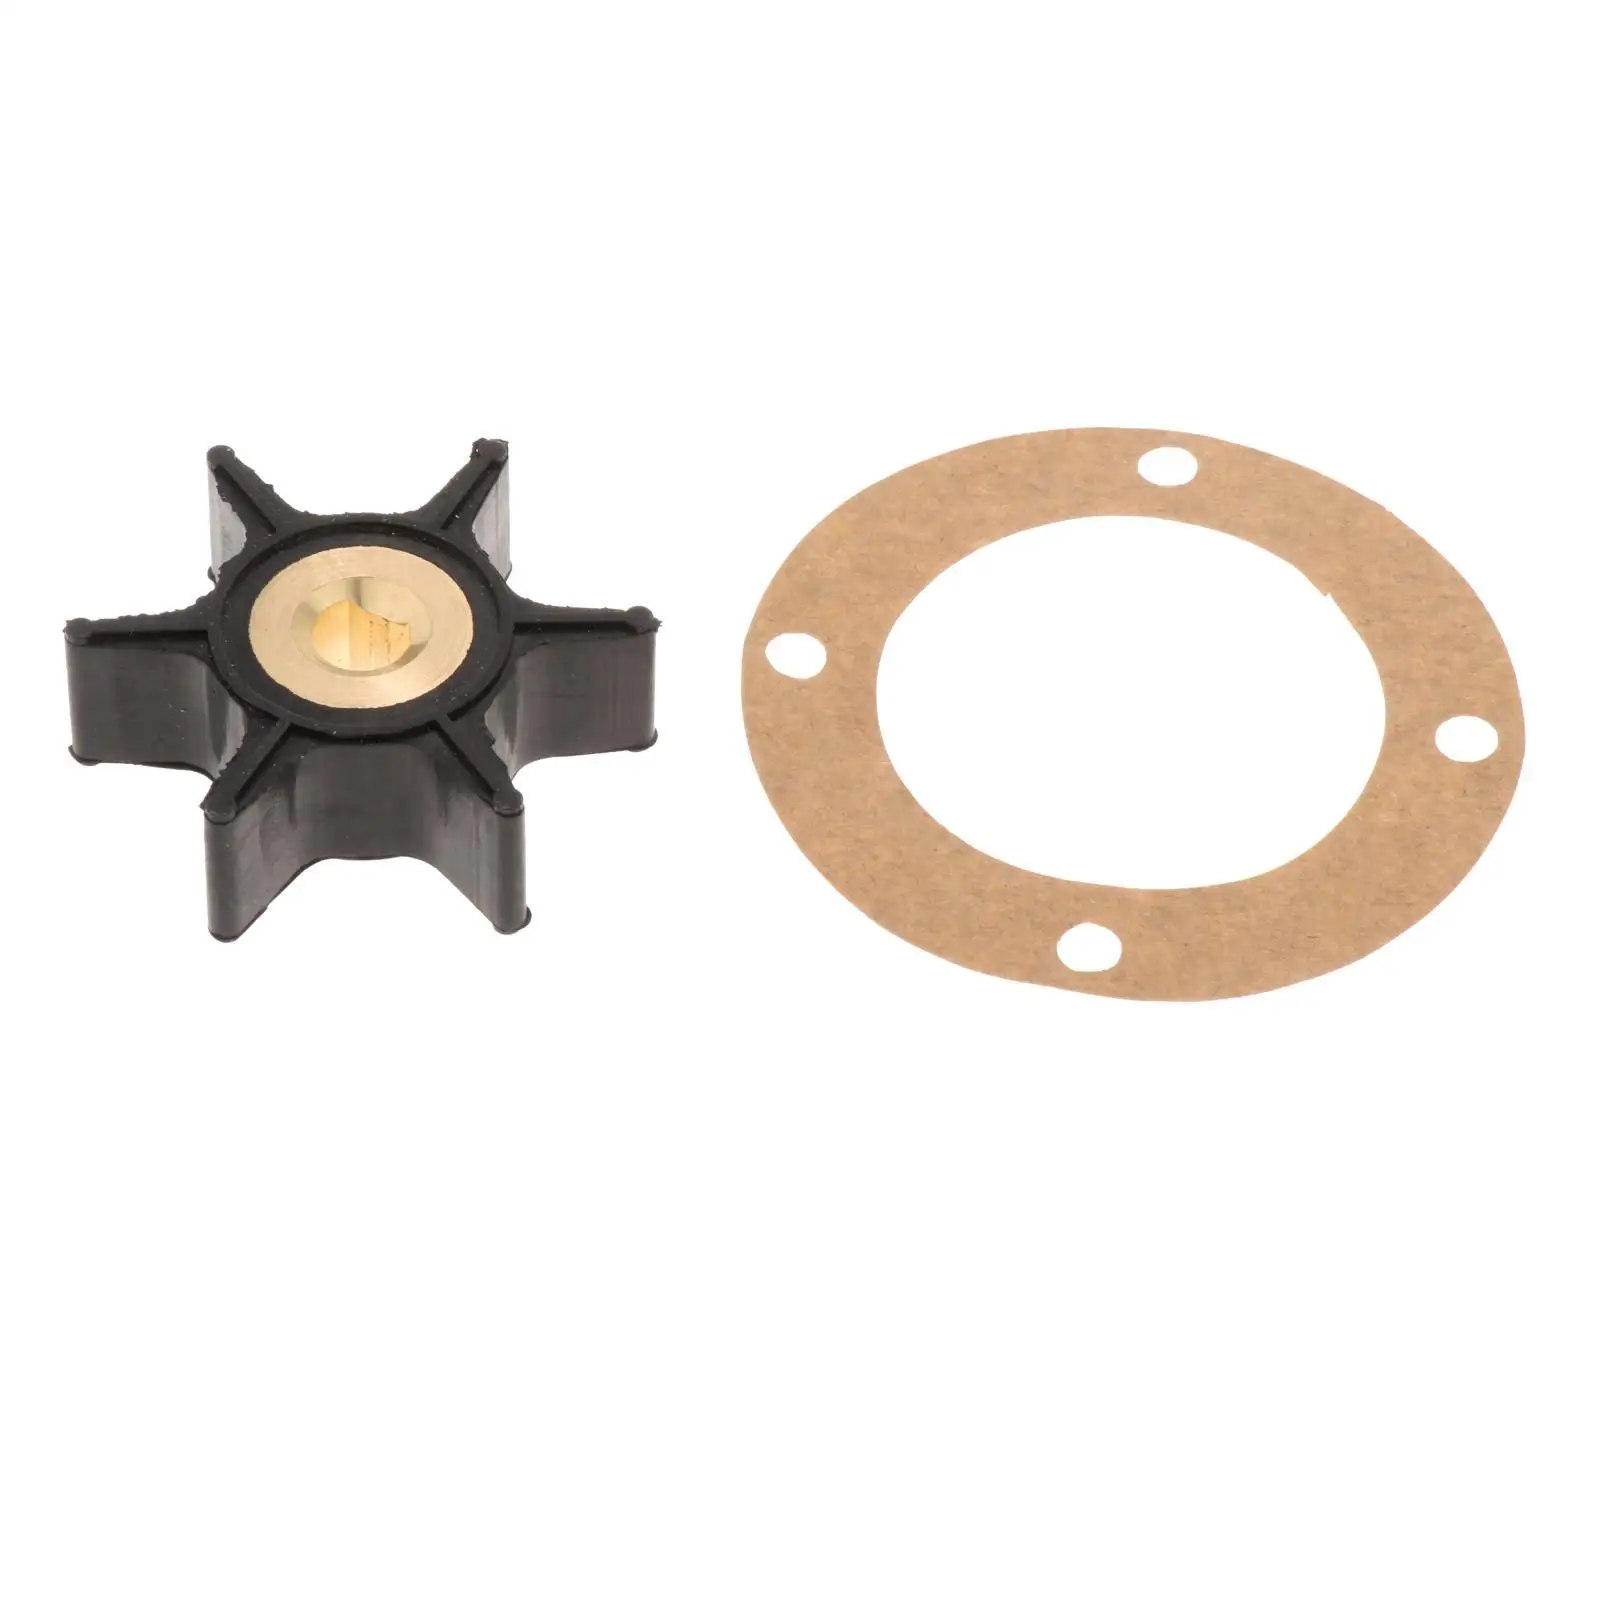 2x Impeller and 4-Hole Gasket , Supplies ,Repair Accessories ,Parts ,Impeller Replacement Fits for Onan 131-0386 170-317 Pump